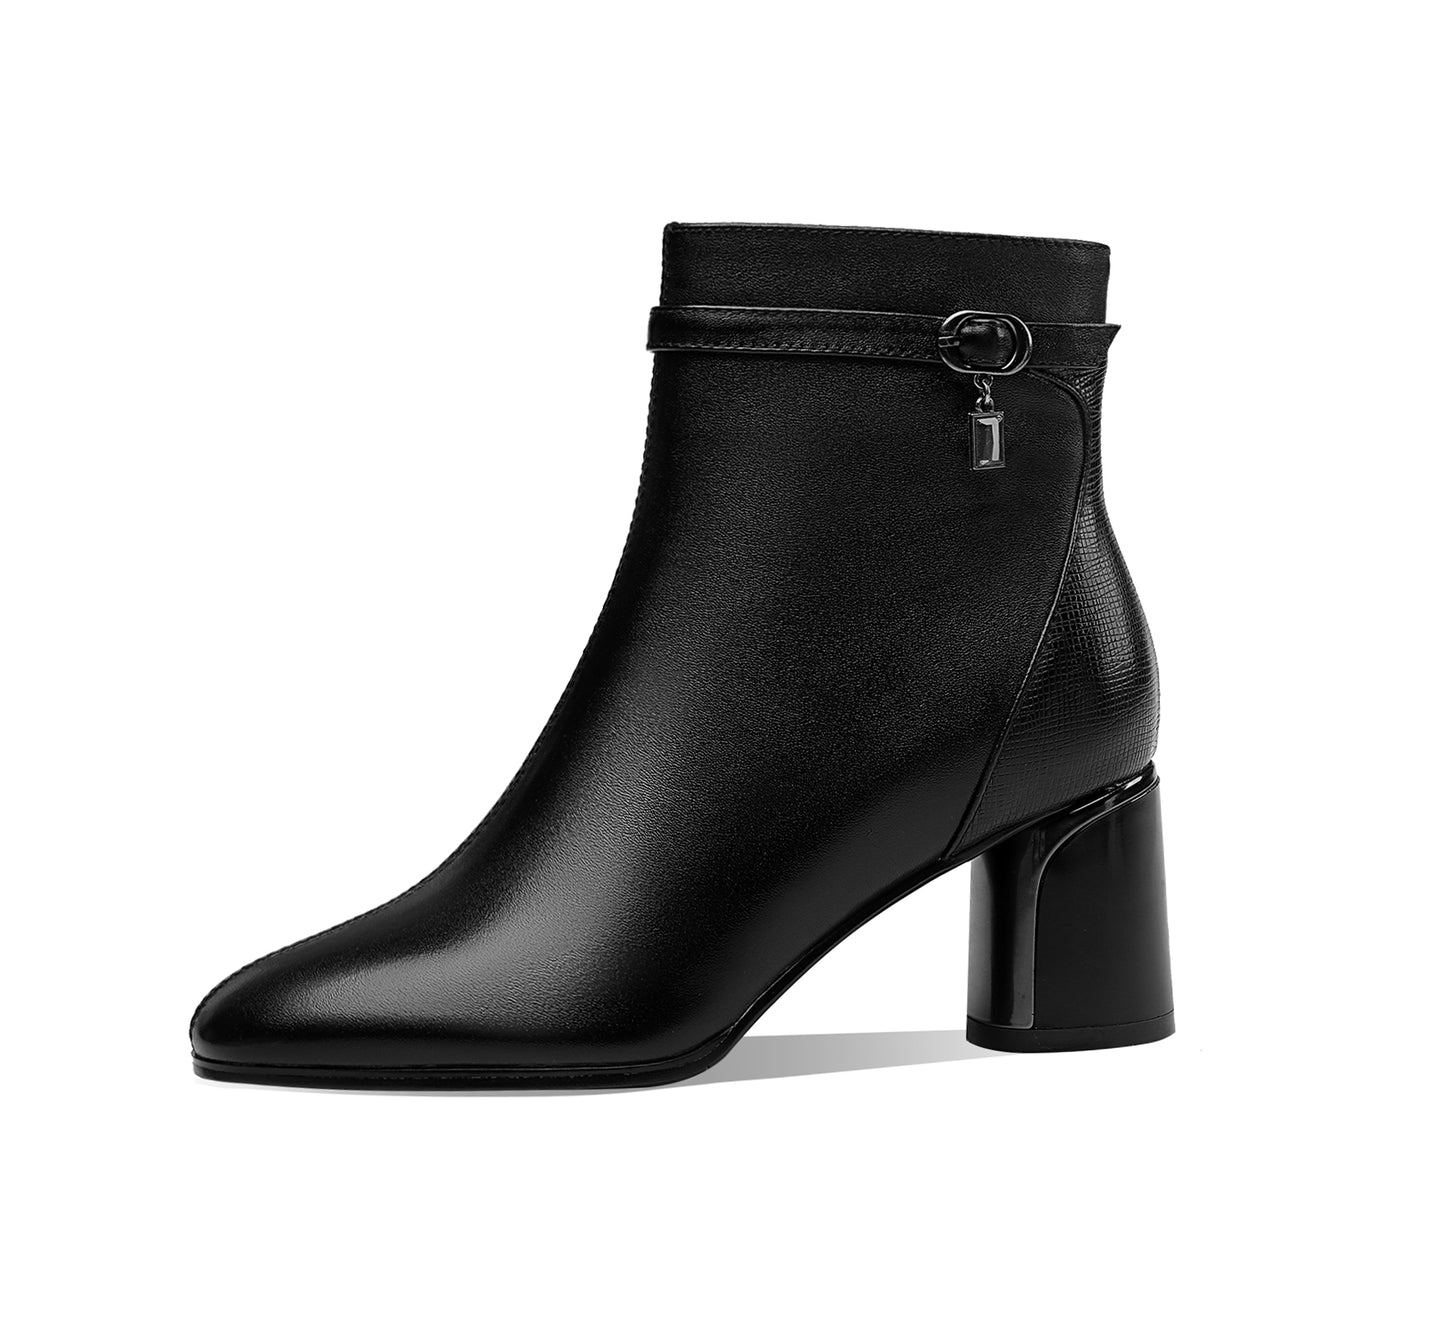 TinaCus Handmade Women's Genuine Leather Ankle Belt Pointed Toe Side Zipper Mid Chunky Heel Ankle Boots